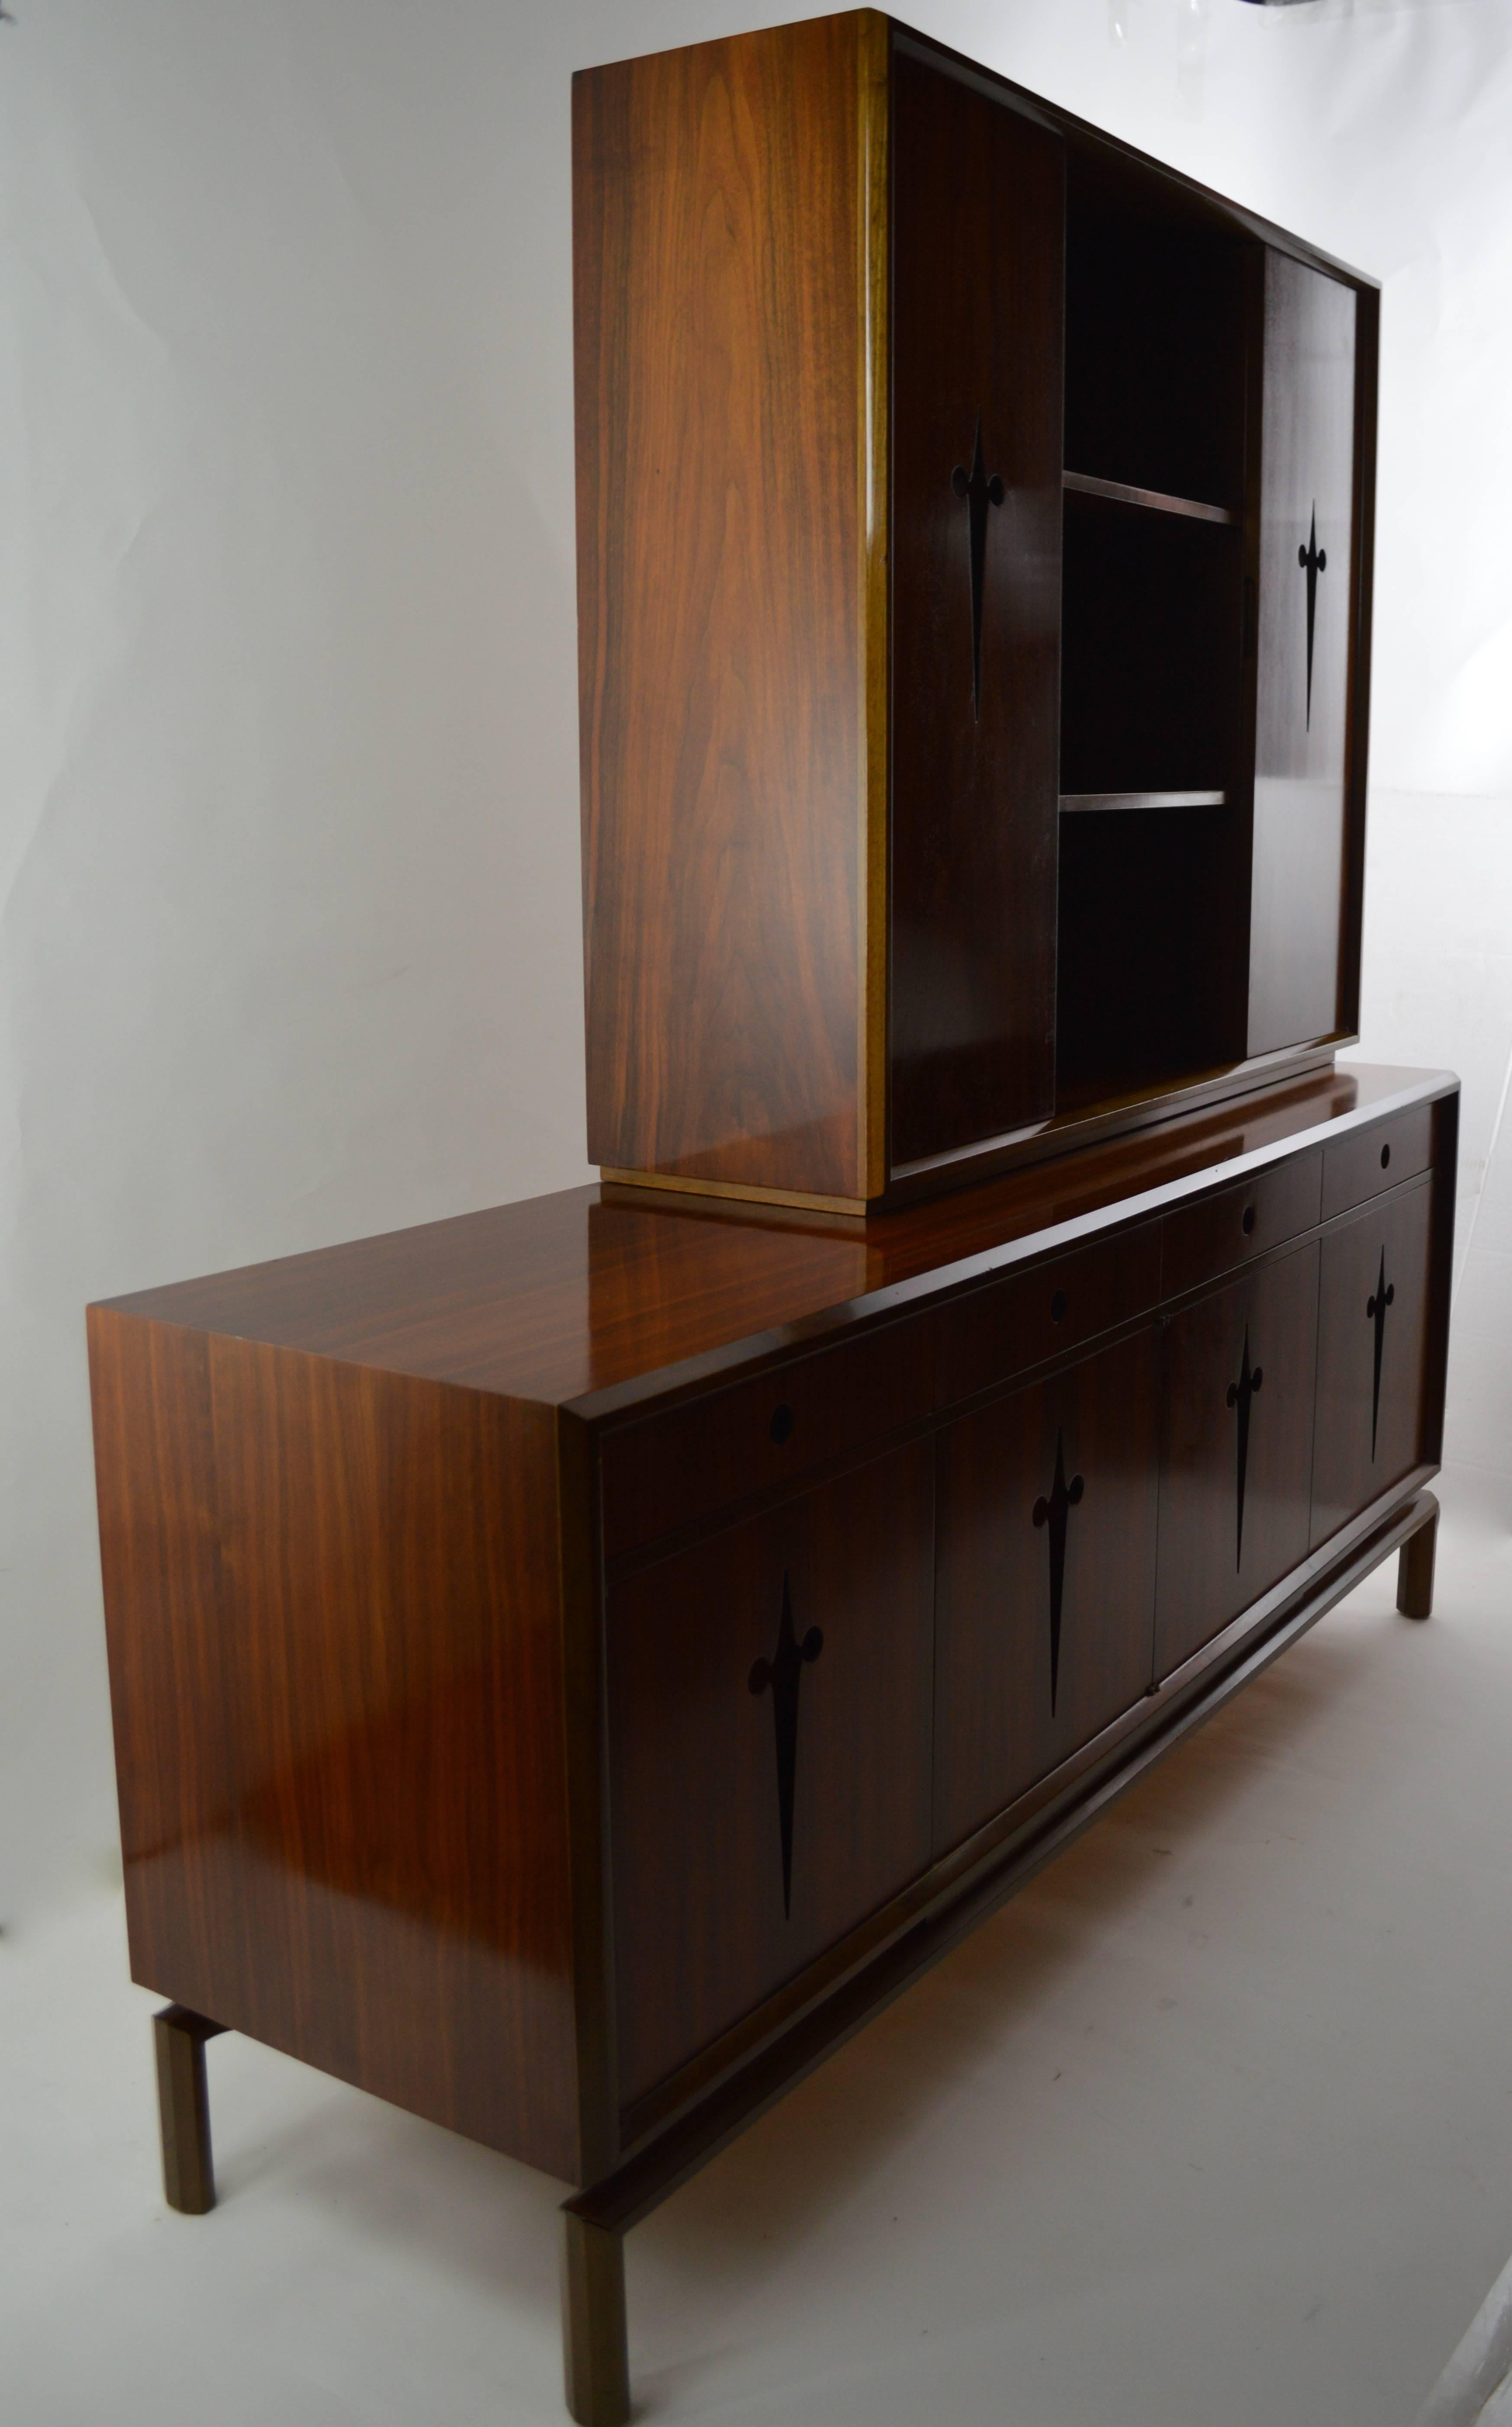 Chic and elegant credenza designed by Edmund Spence. This example is in very good original condition, clean and ready to use. Top is movable and removable, however there is a shadow where it sits, as it has been in position since the mid-20th